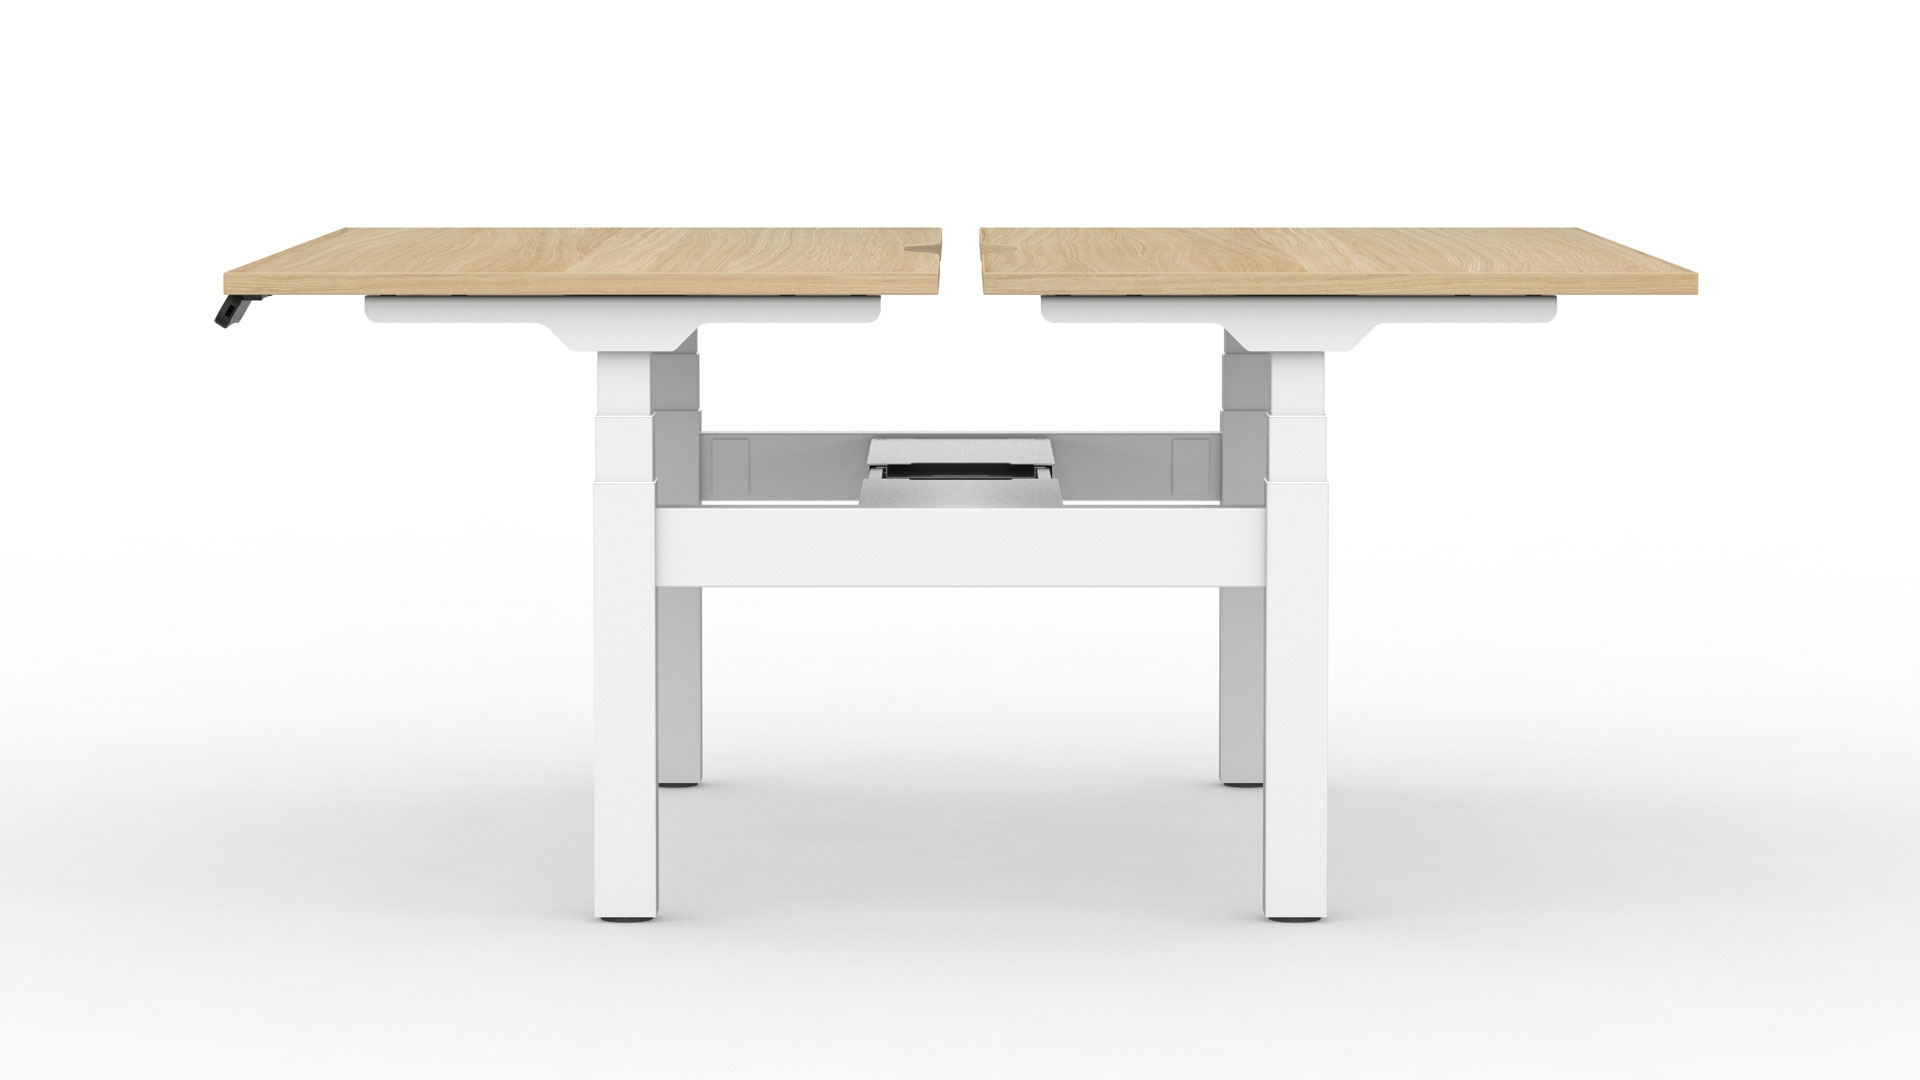 Alto 2 bench desks feature 3-stage square lifting columns with dual motors